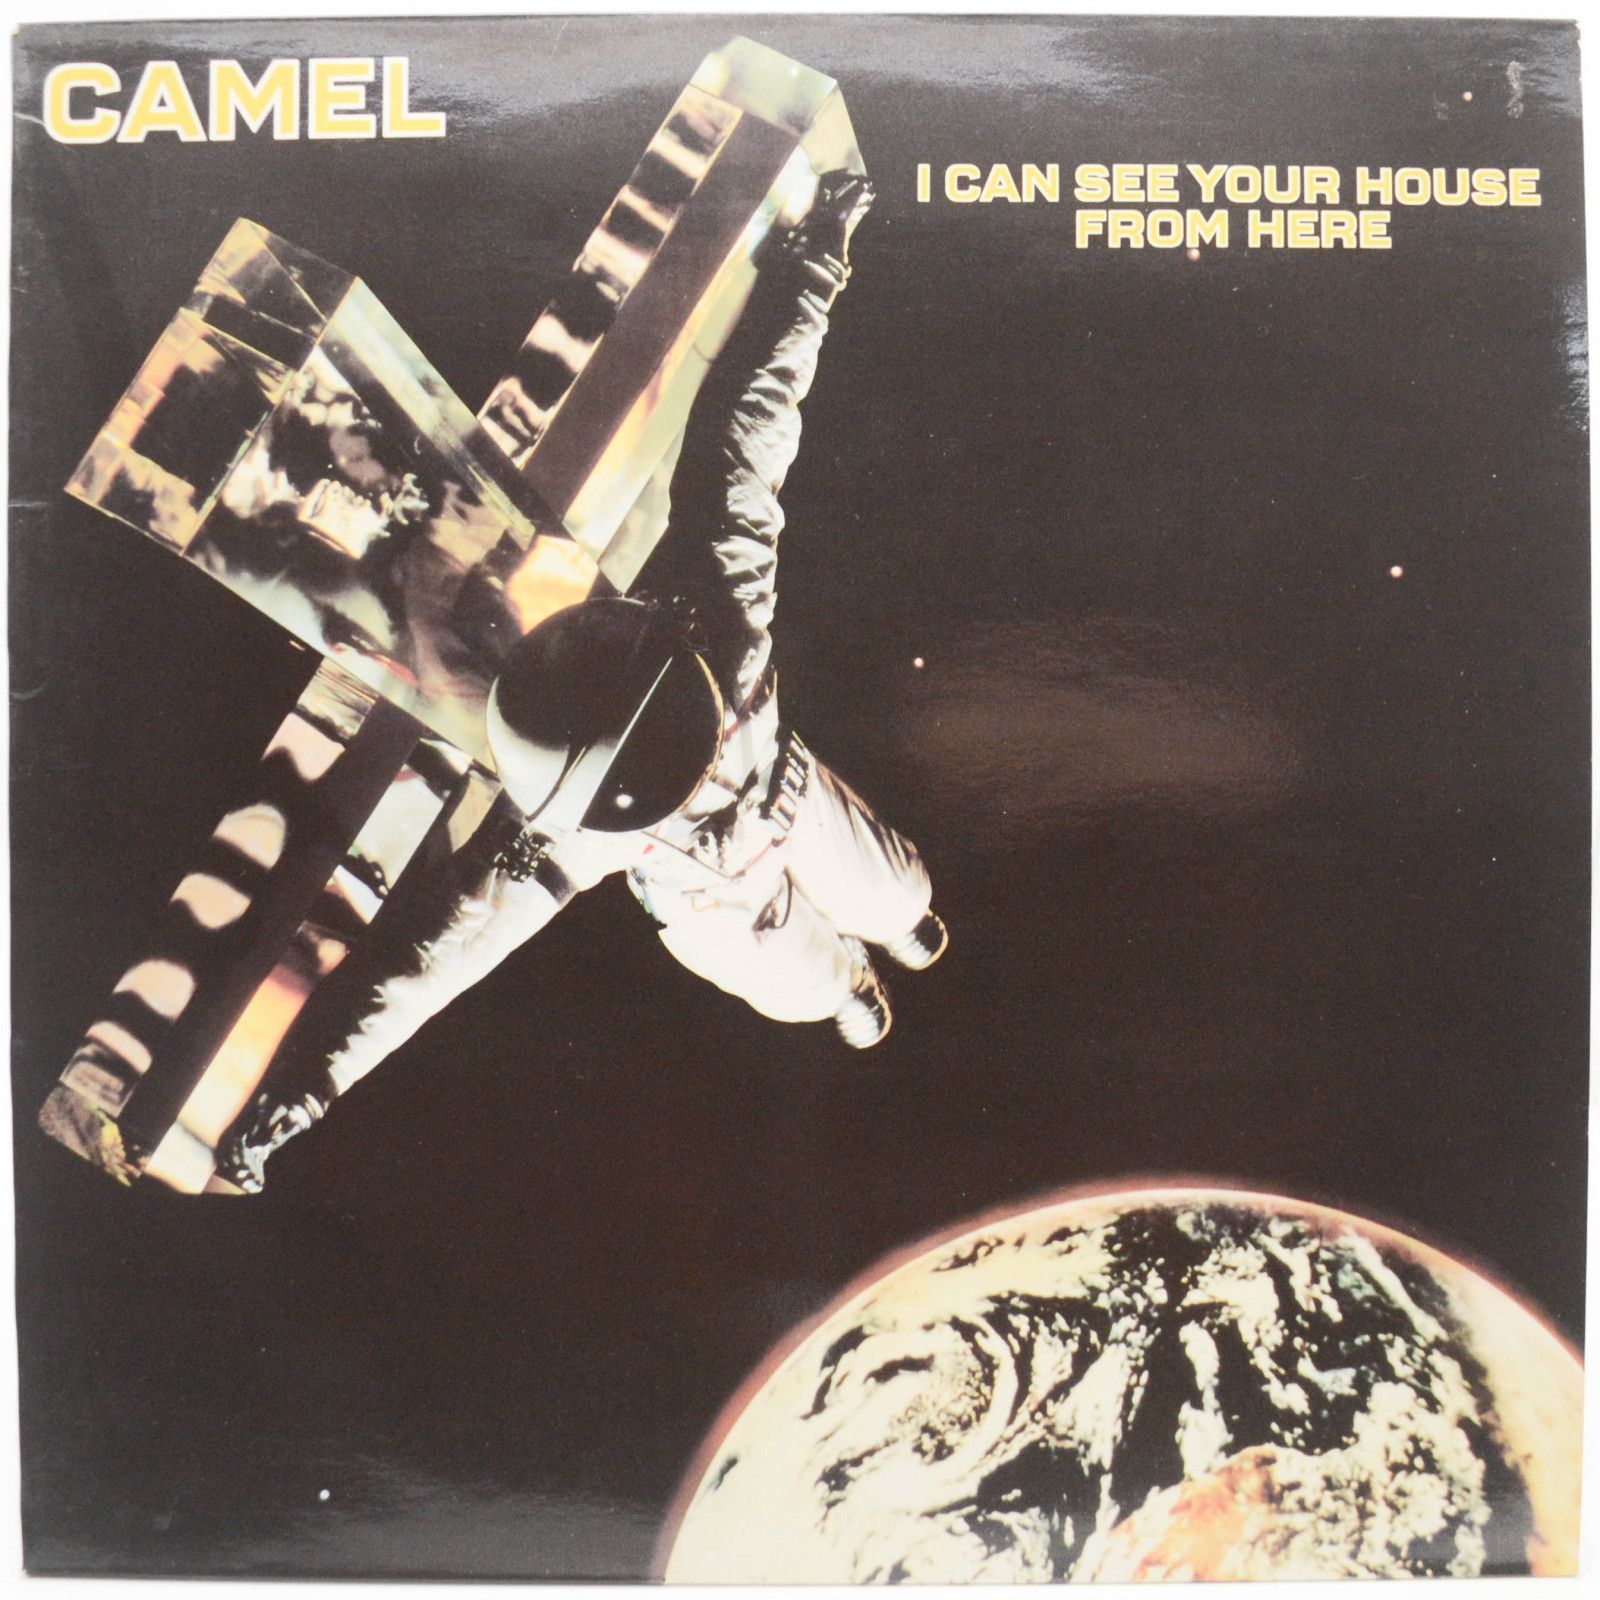 Camel — I Can See Your House From Here, 1979